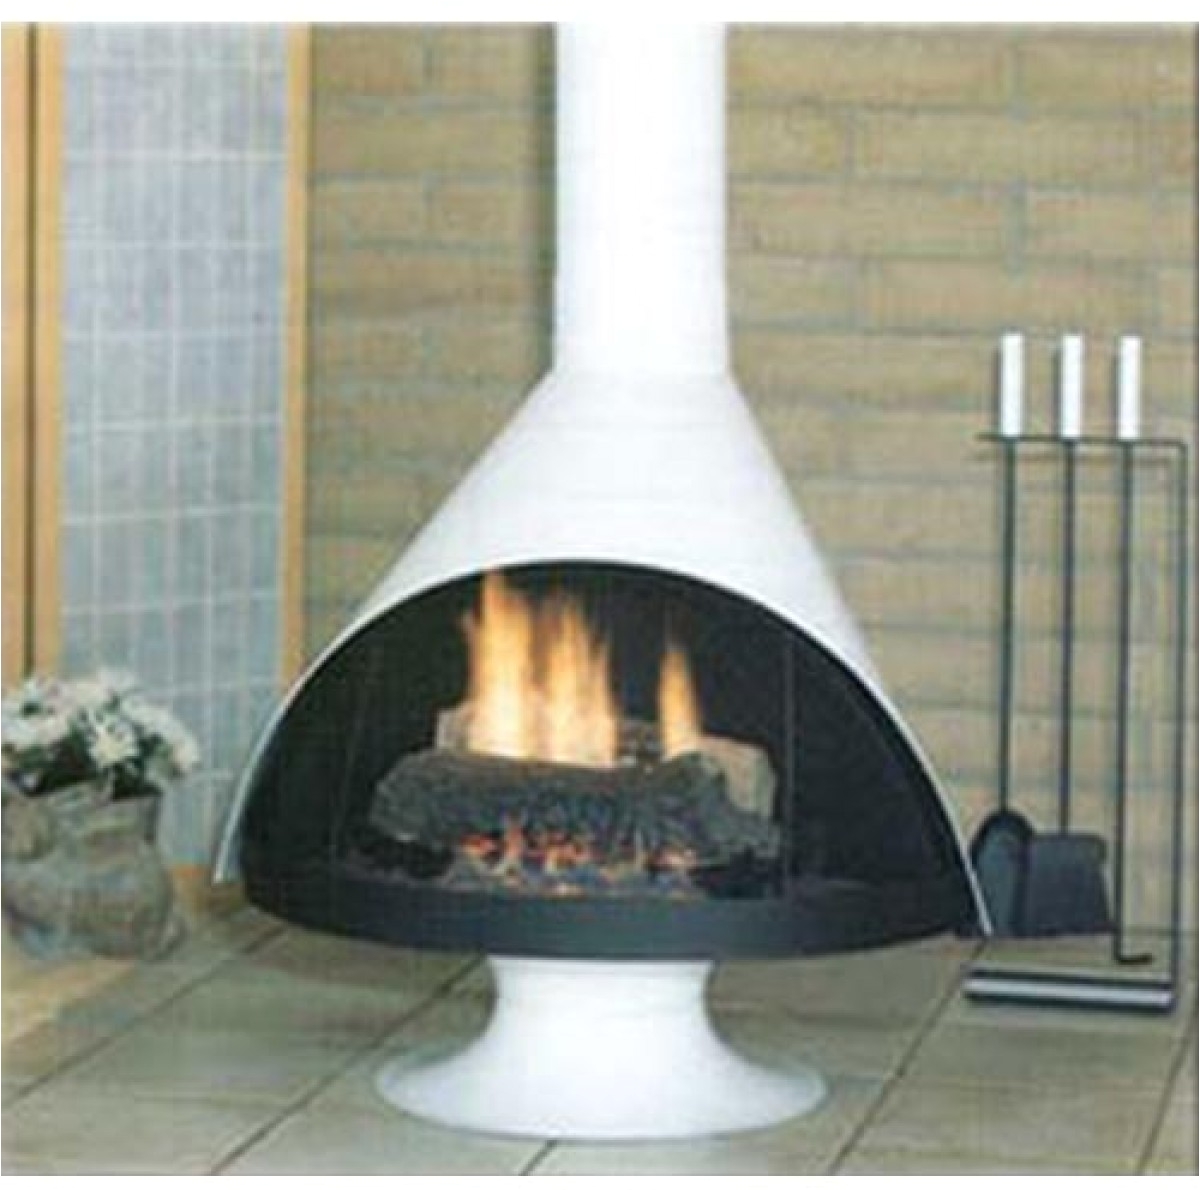 Duraflame Fireplace Unique Preway Fireplace for Sale Canada